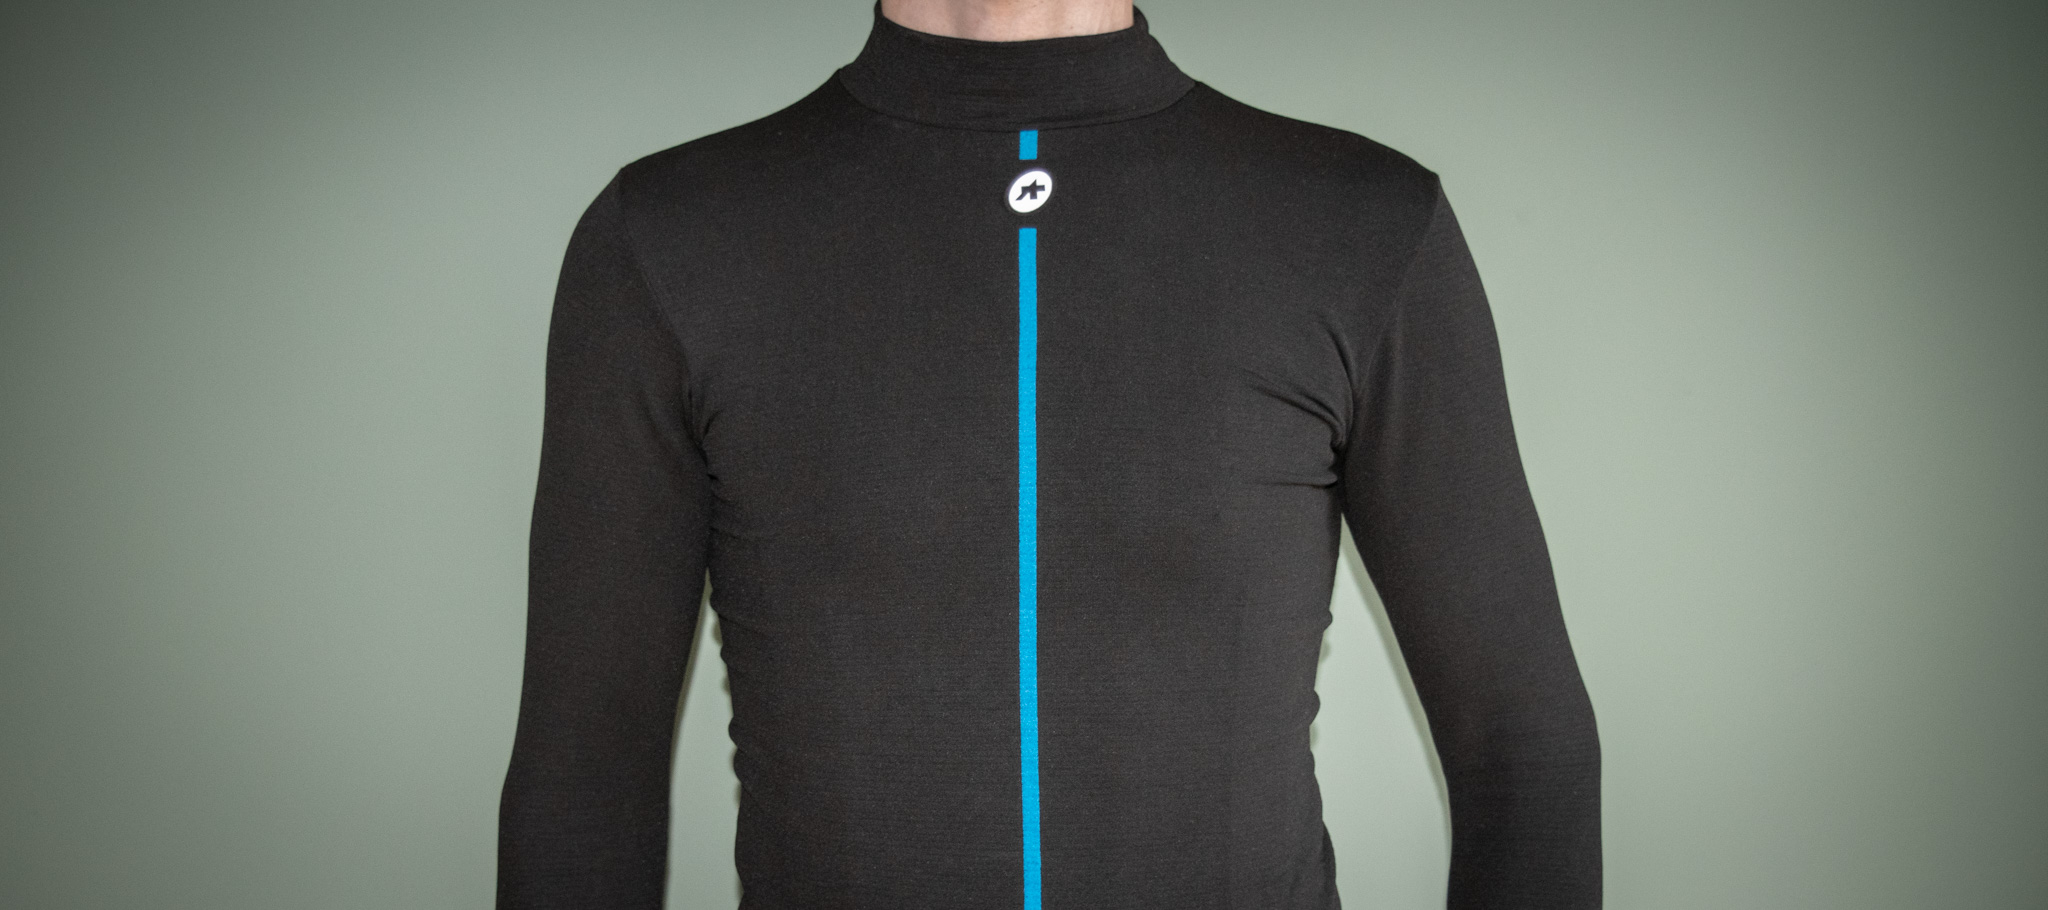 Review of the Assos LS skin layer winter base layer | Cyclingnews